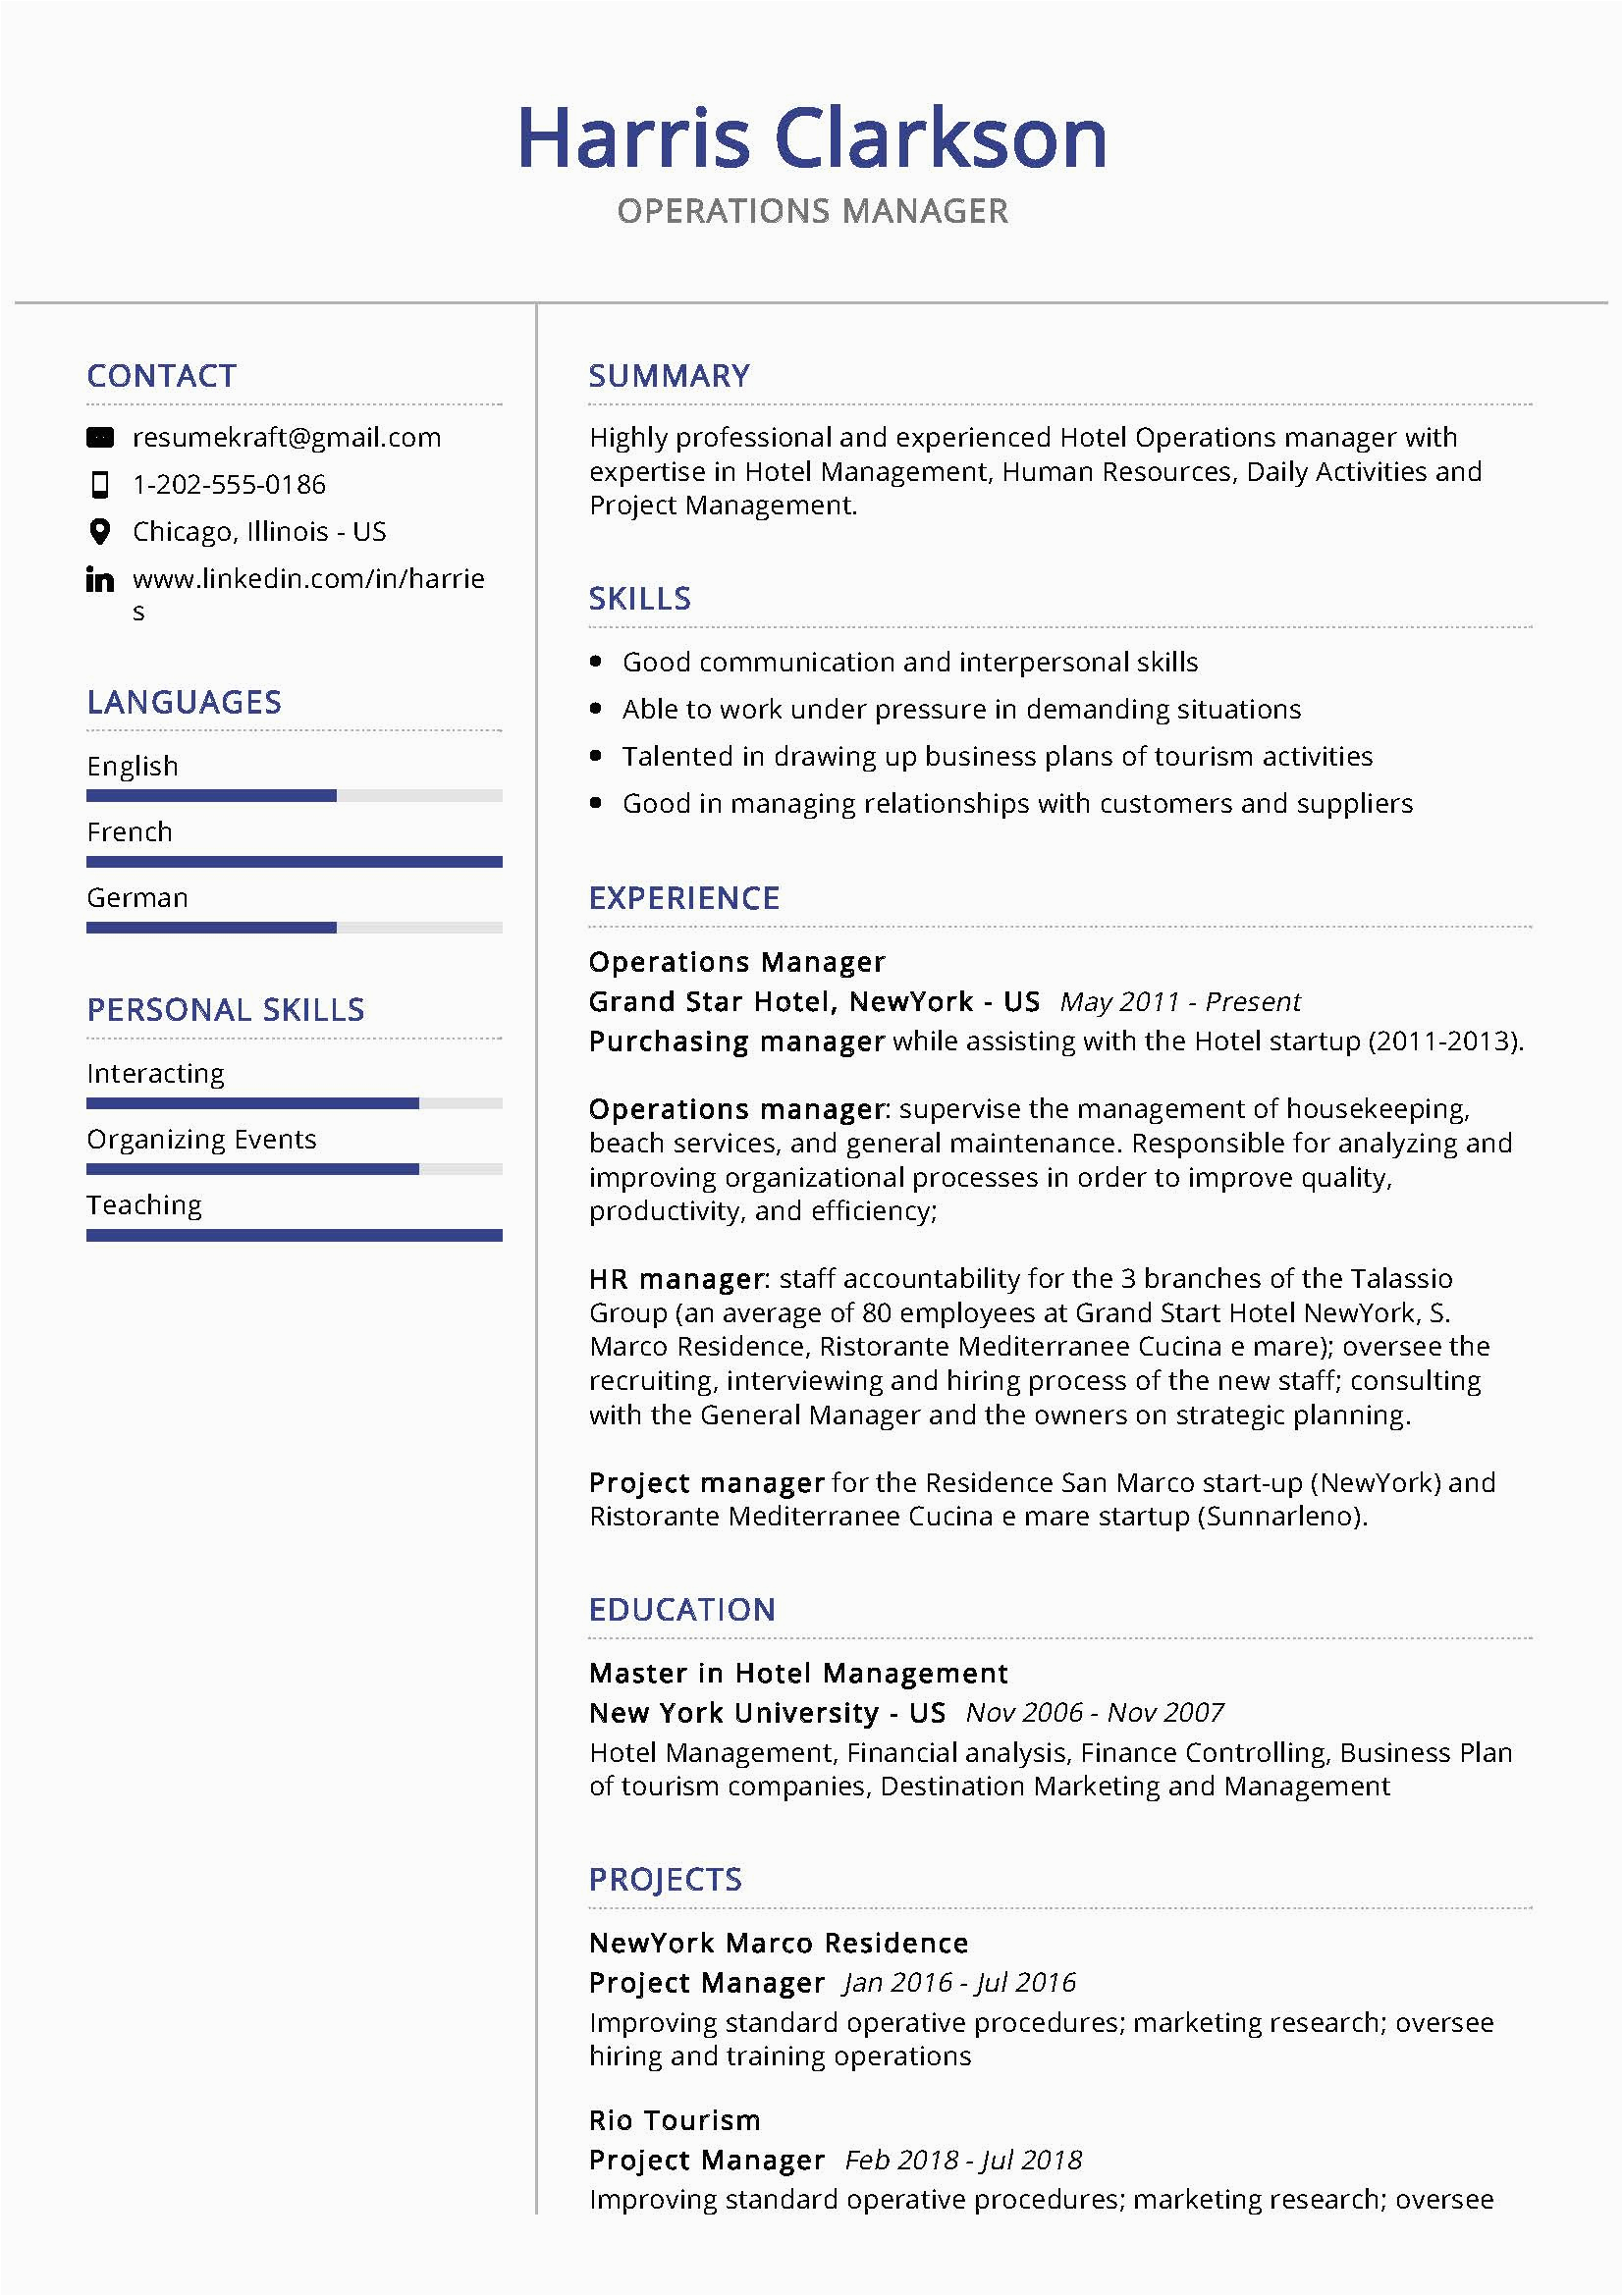 Professional Summary Resume Sample for Manager Operations Manager Resume Sample & Writing Tips 2020